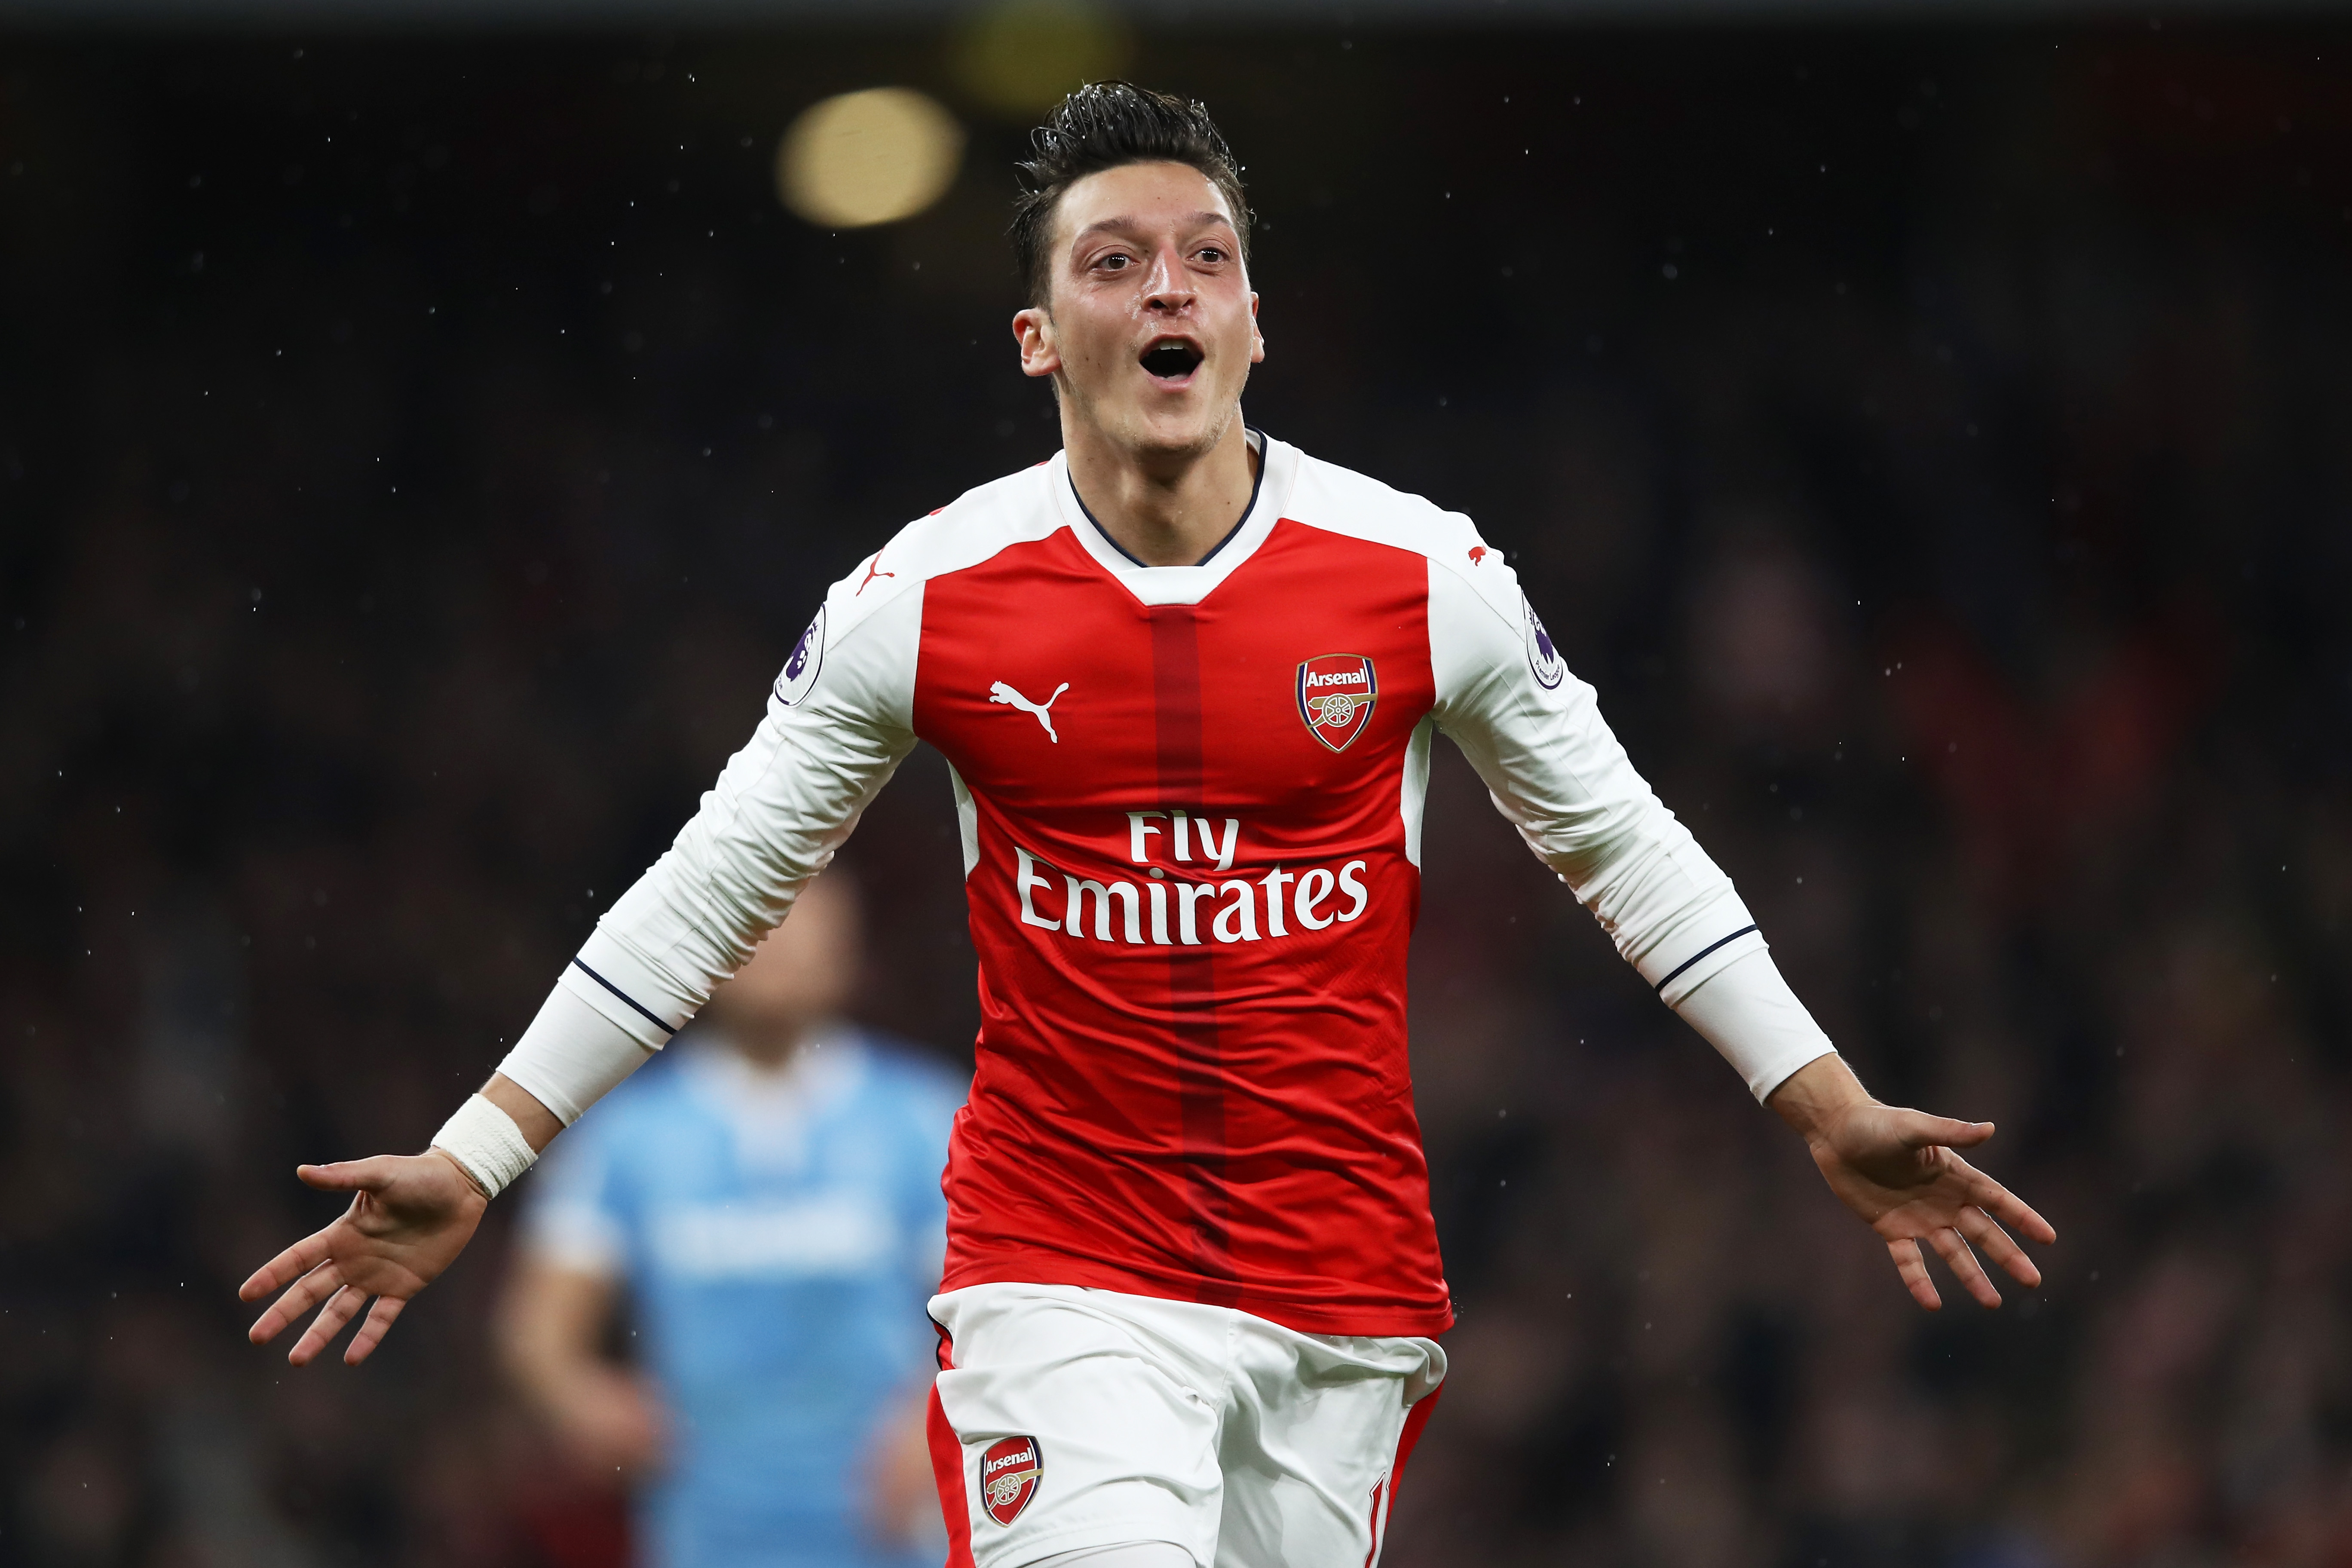 Ozil stood out during his time at Arsenal and Real Madrid